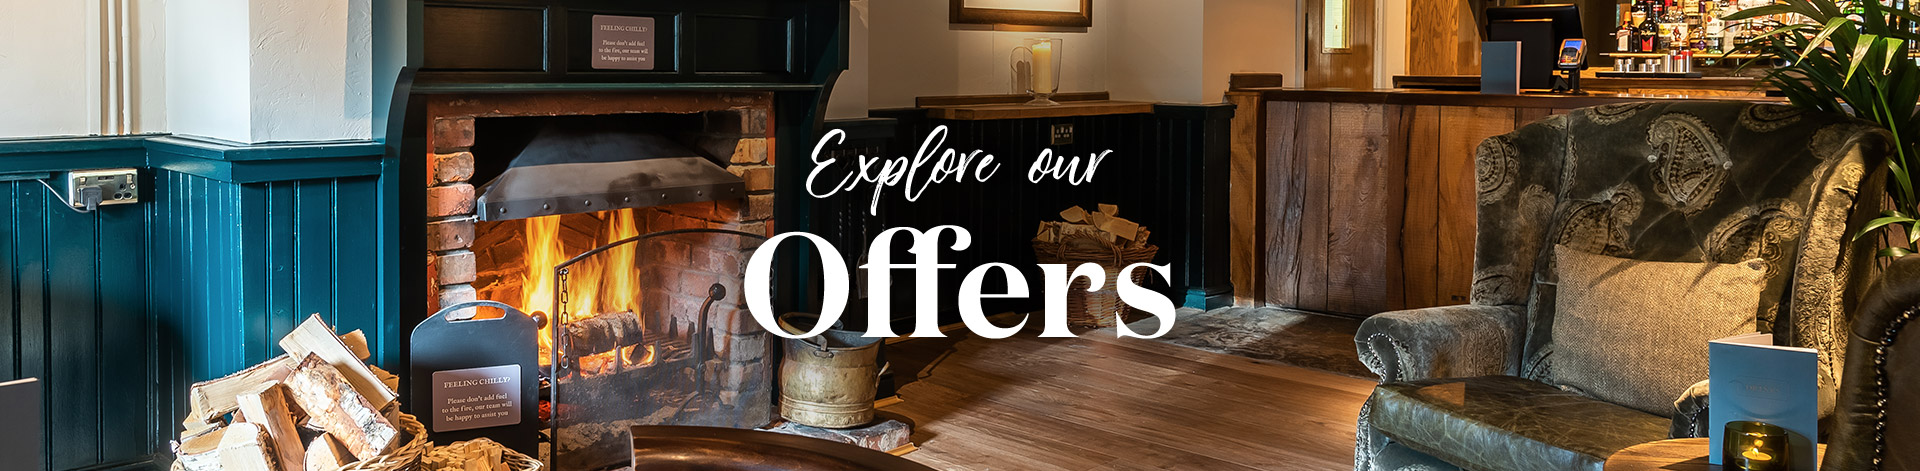 Our latest offers at The Broughton Inn